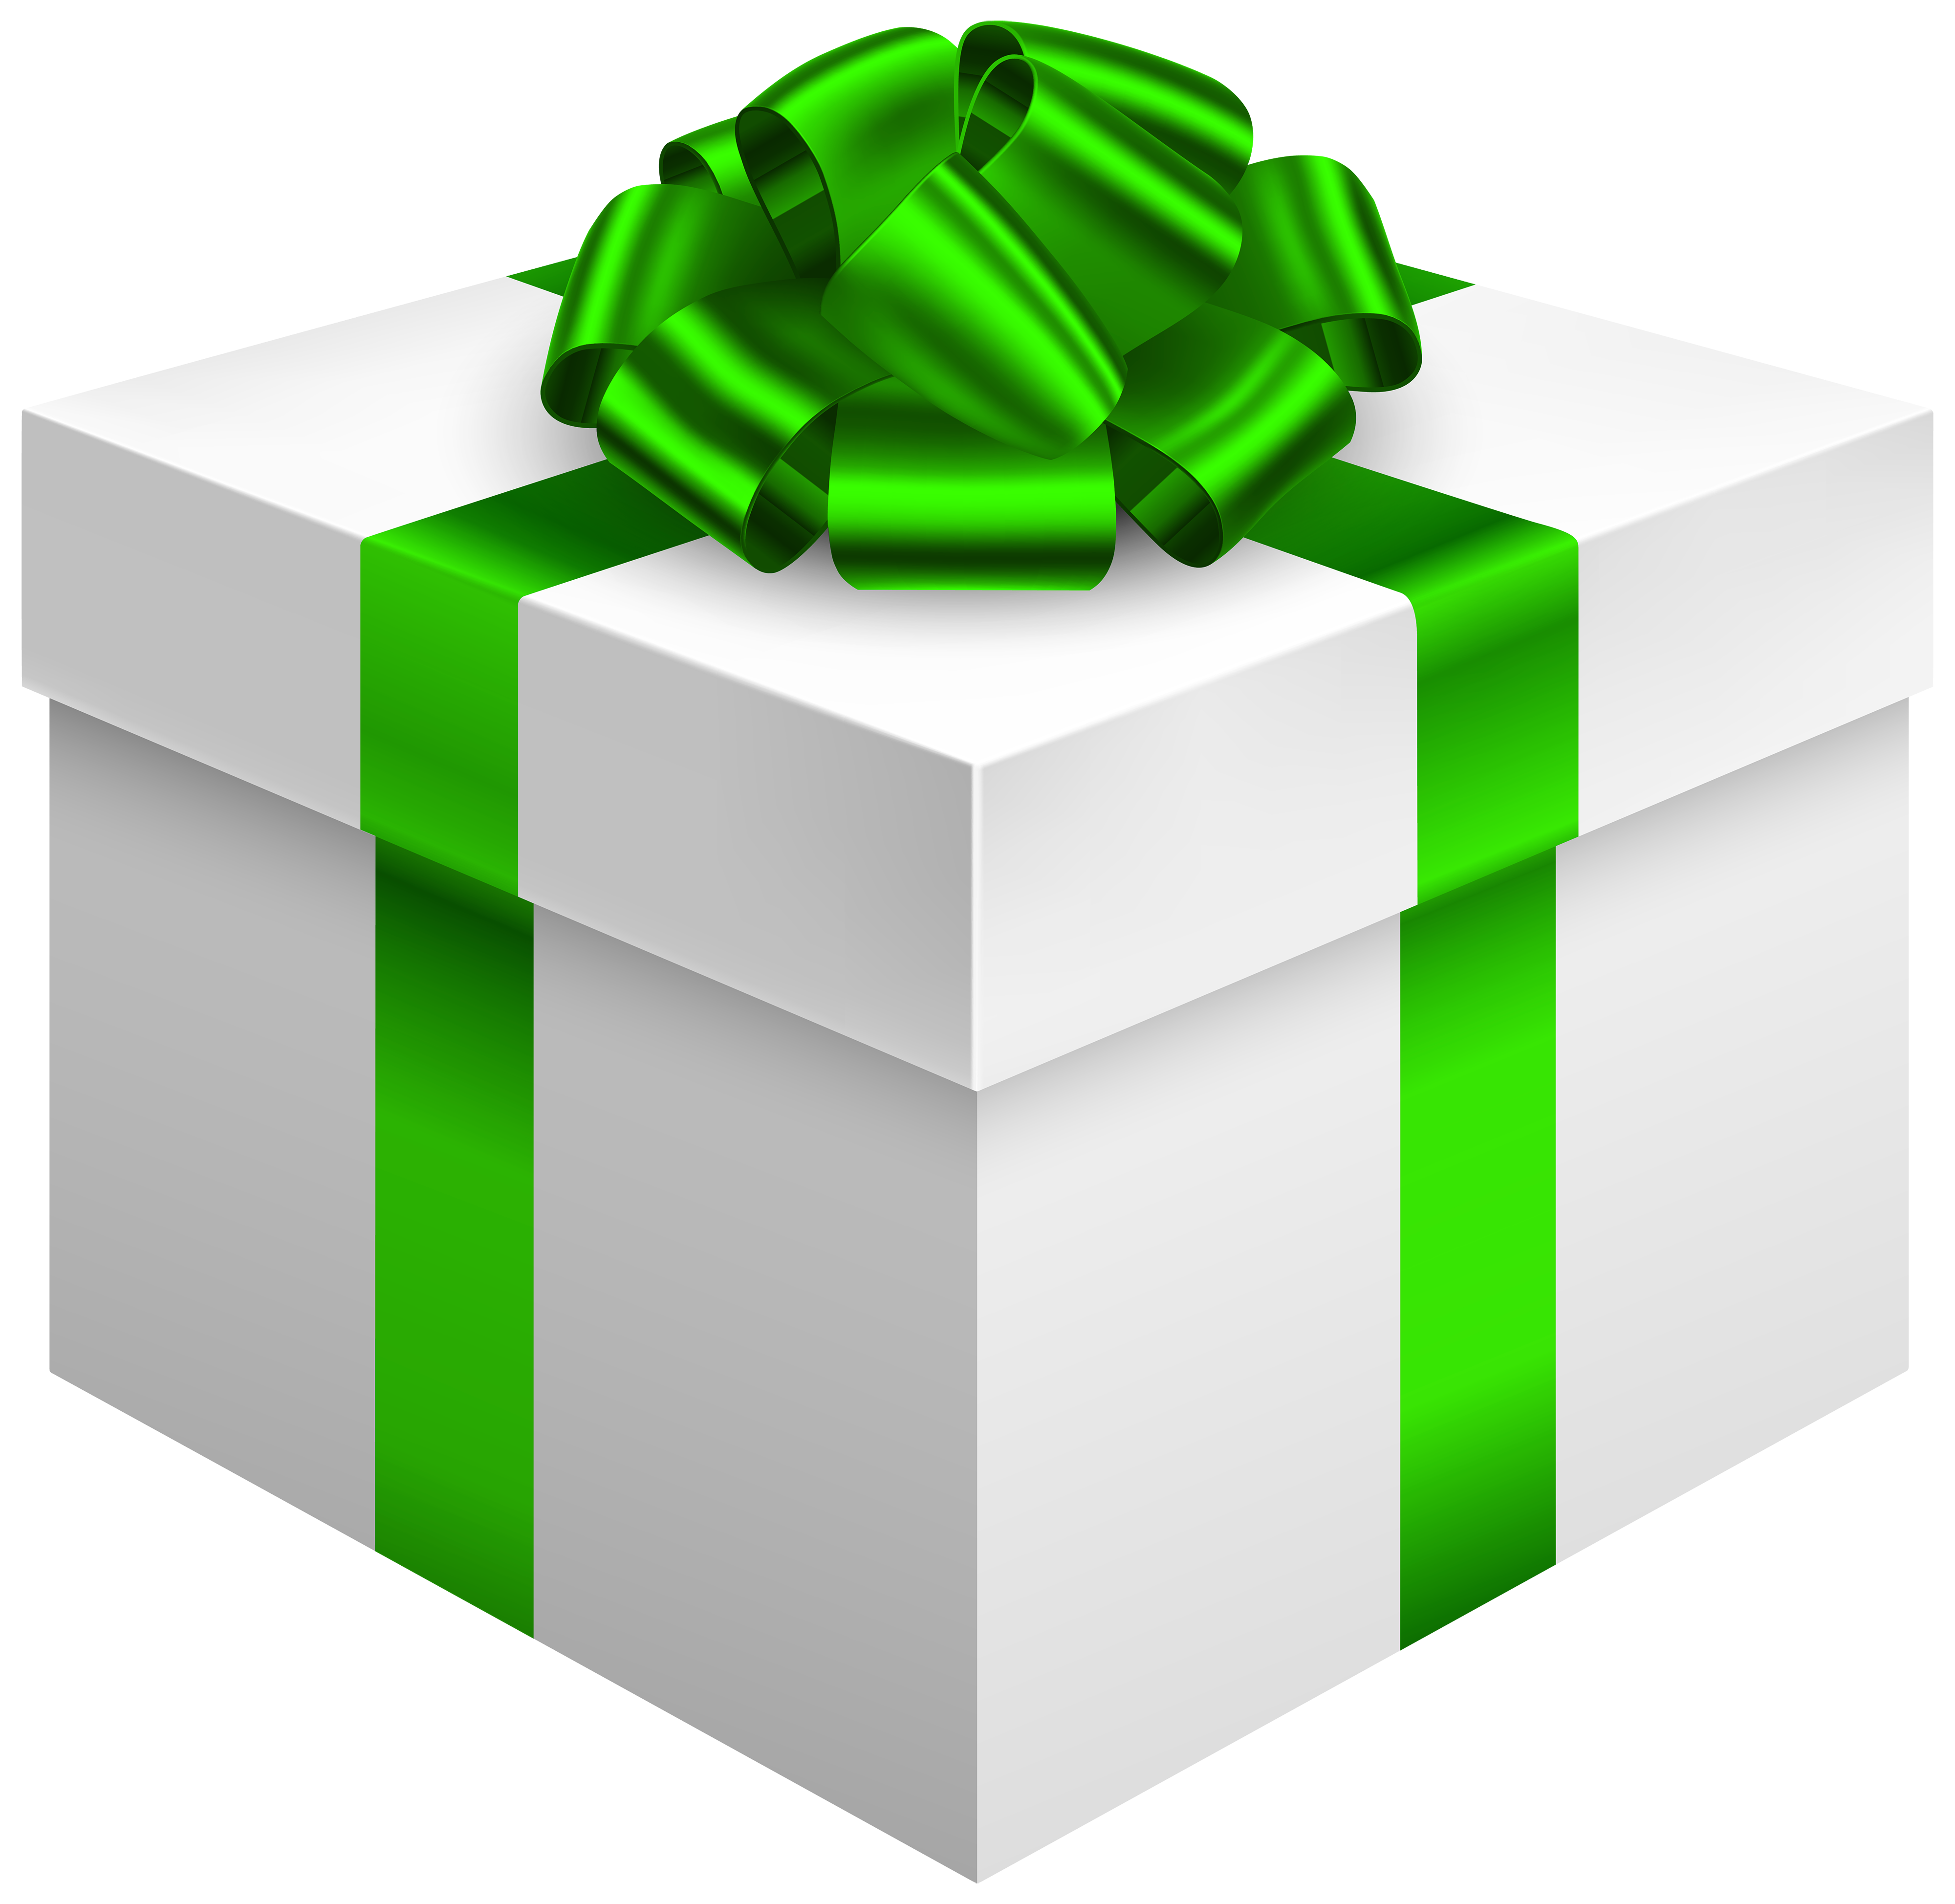 White Gift Box with Green Bow PNG Clipart - Best WEB Clipart